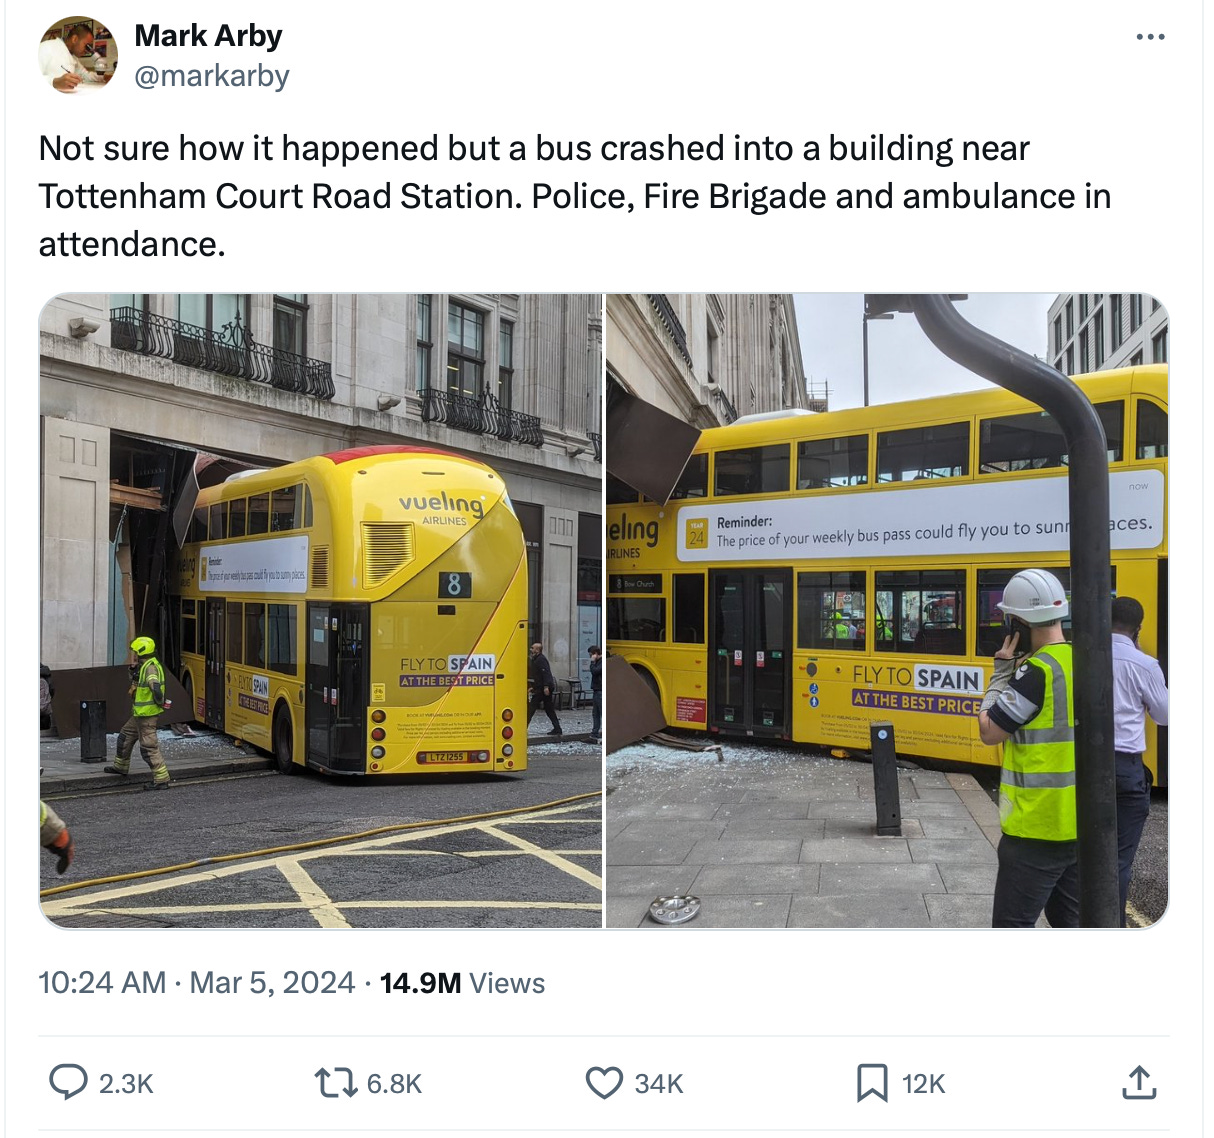 Mark Arby tweet: Not sure how it happened but a bus crashed into a building near Tottenham Court Road Station. Police, Fire Brigade and ambulance in attendance. 